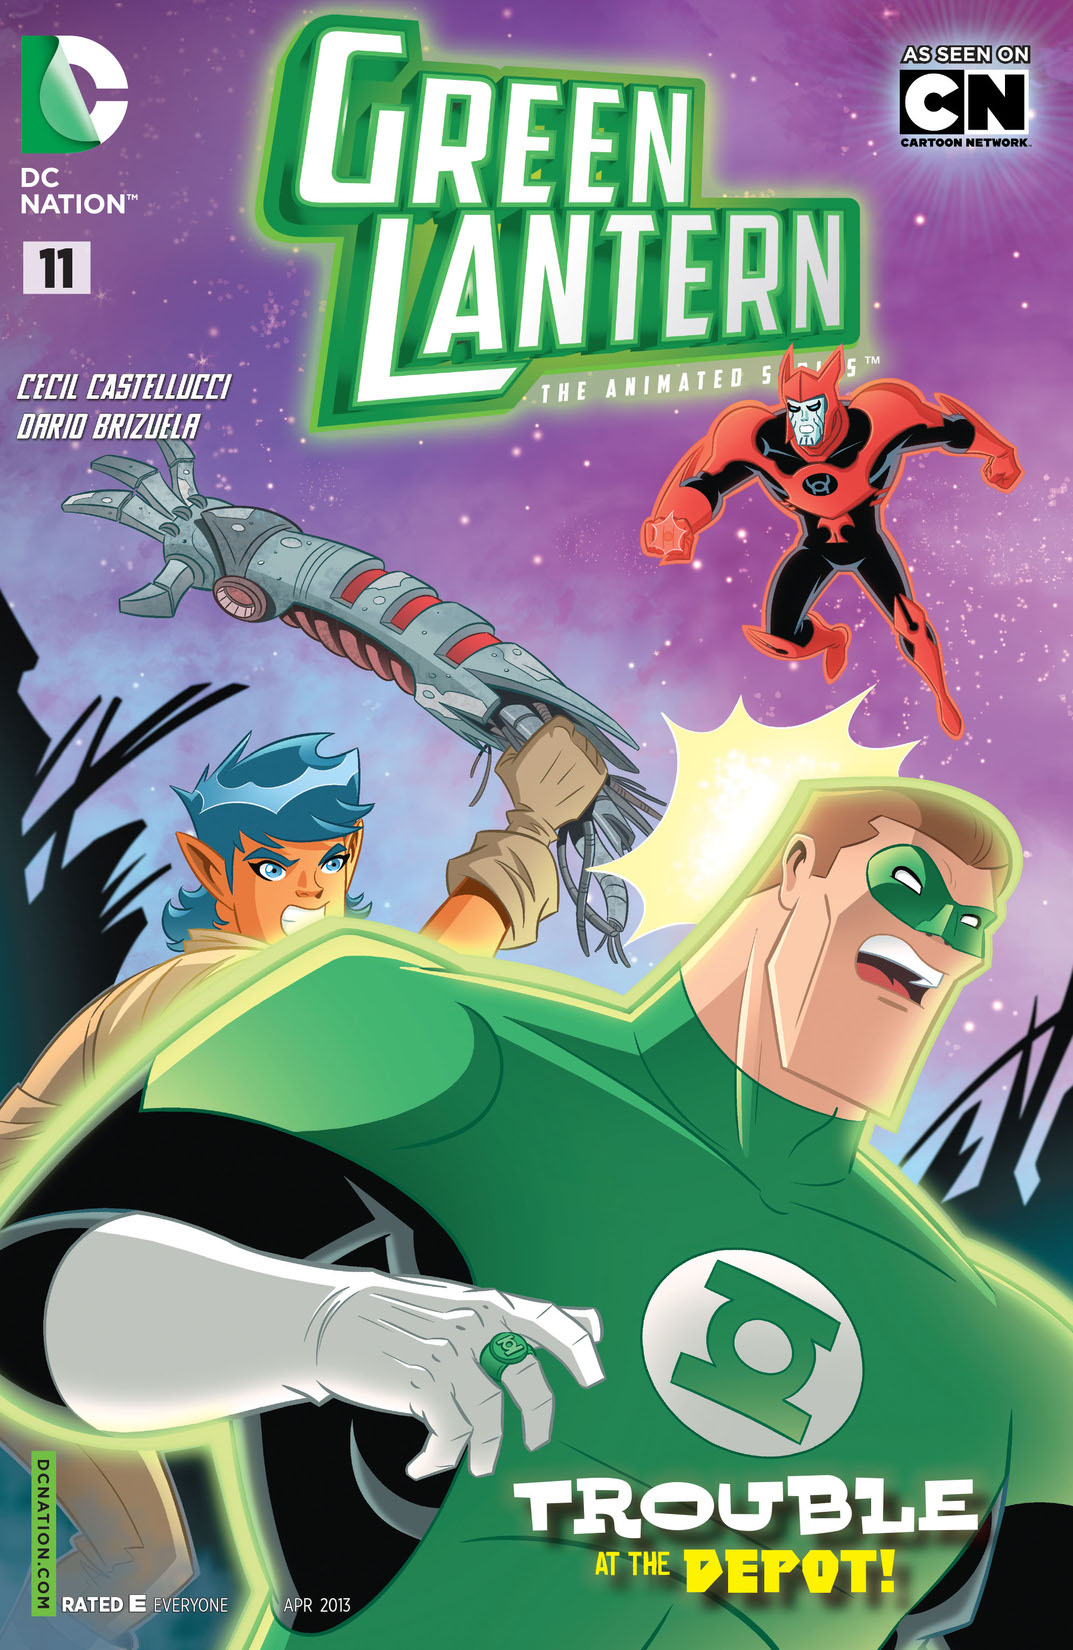 Green Lantern: The Animated Series #11 preview images